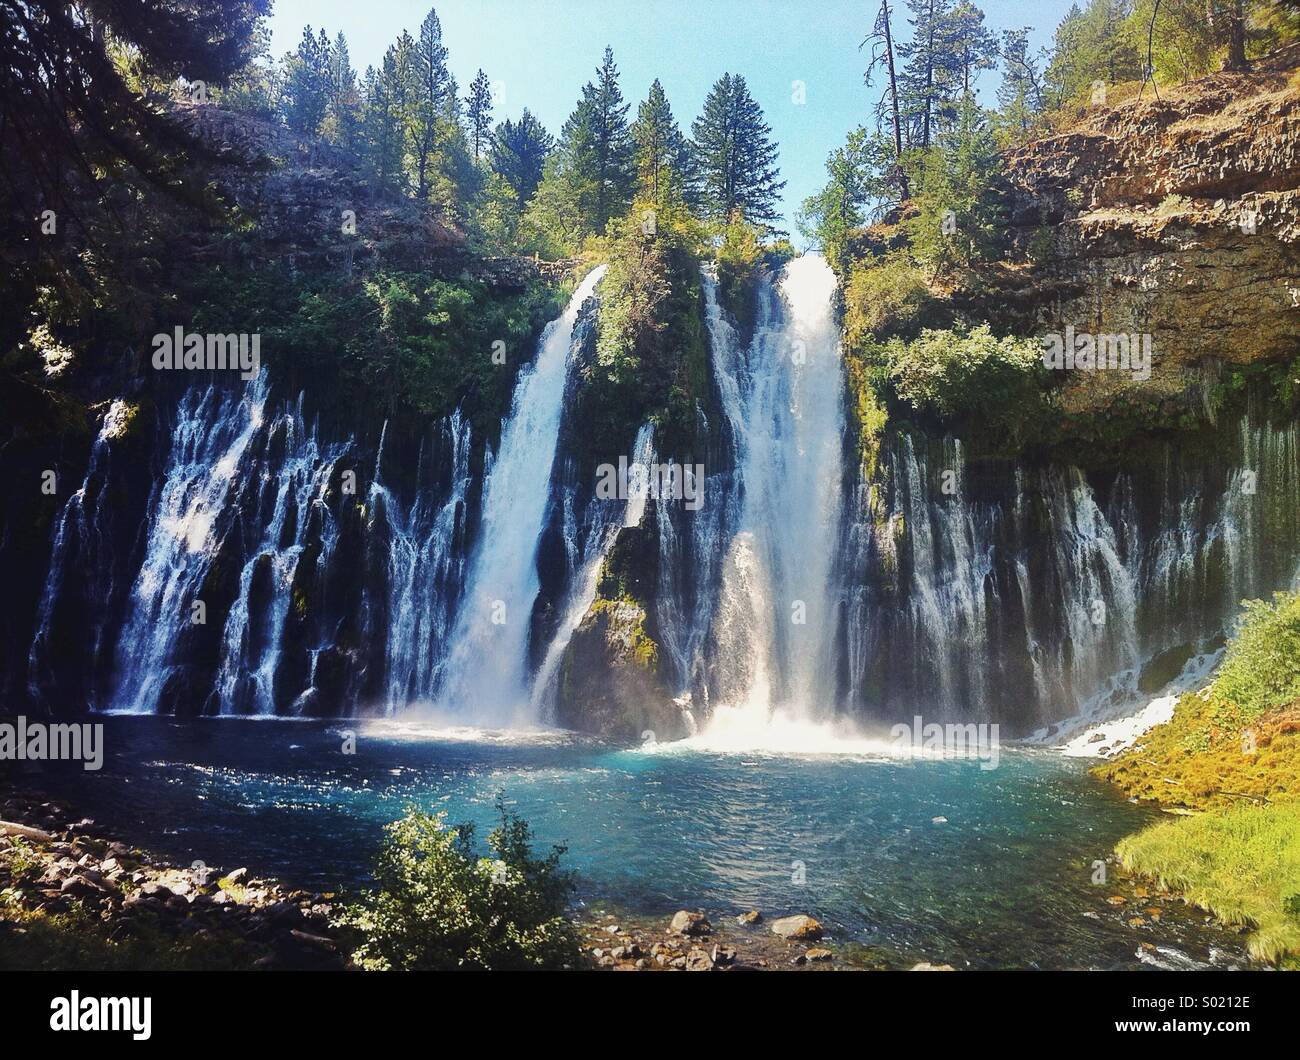 Burney Falls, is a waterfall on Burney Creek, in McArthur-Burney Falls Memorial State Park, Shasta County, California. Stock Photo